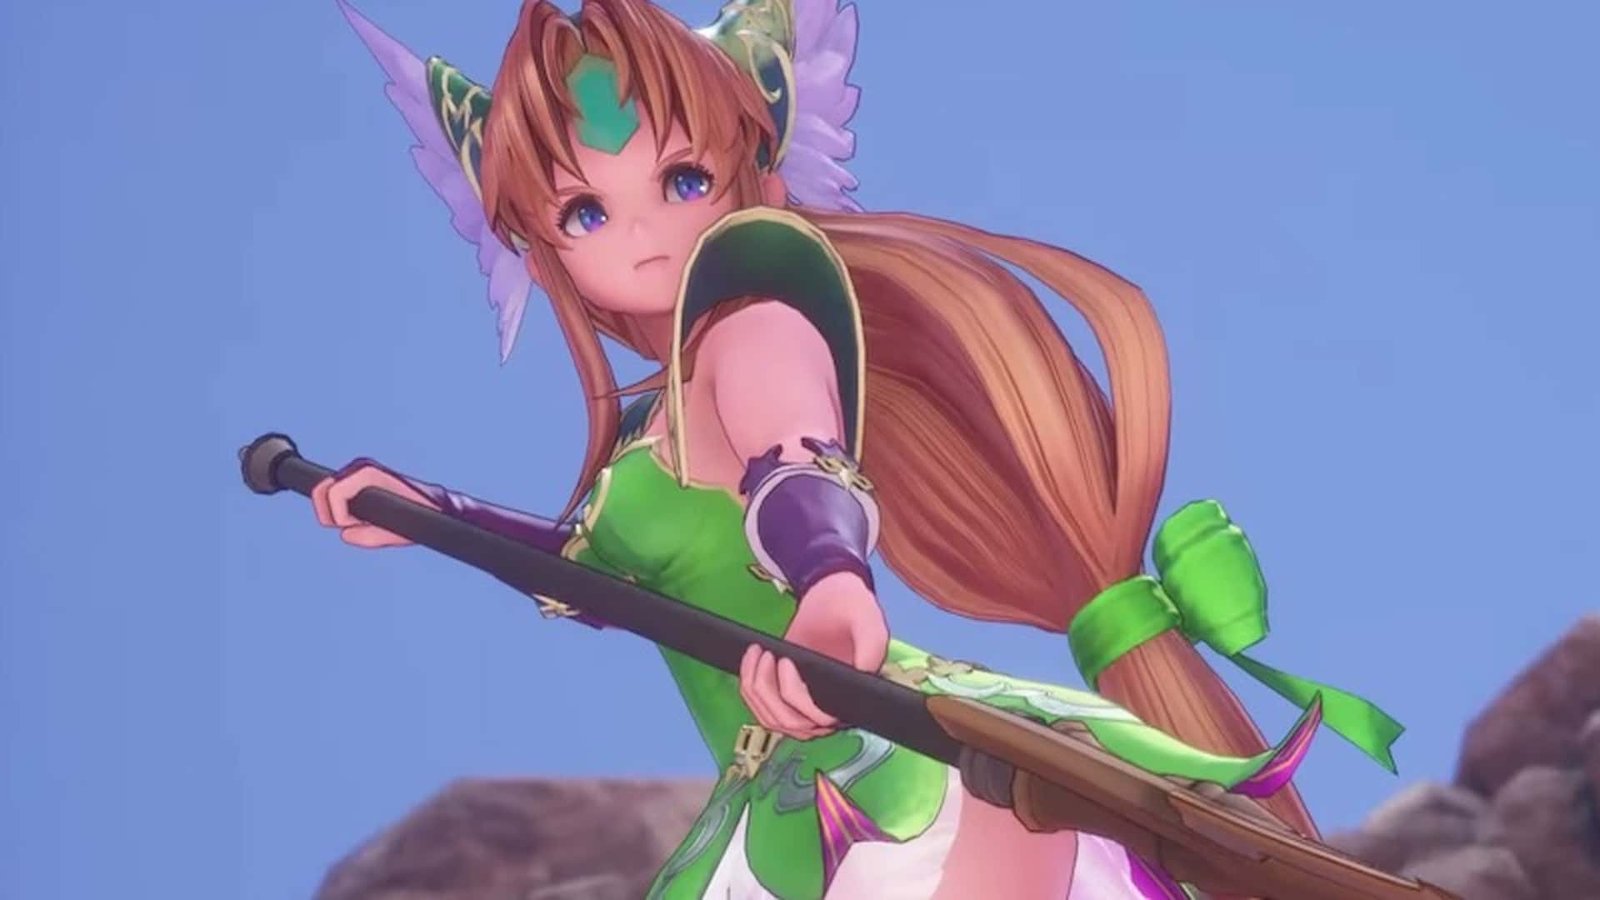 Trials of Mana Remake Demo – Riesz’ Route (First Impressions)